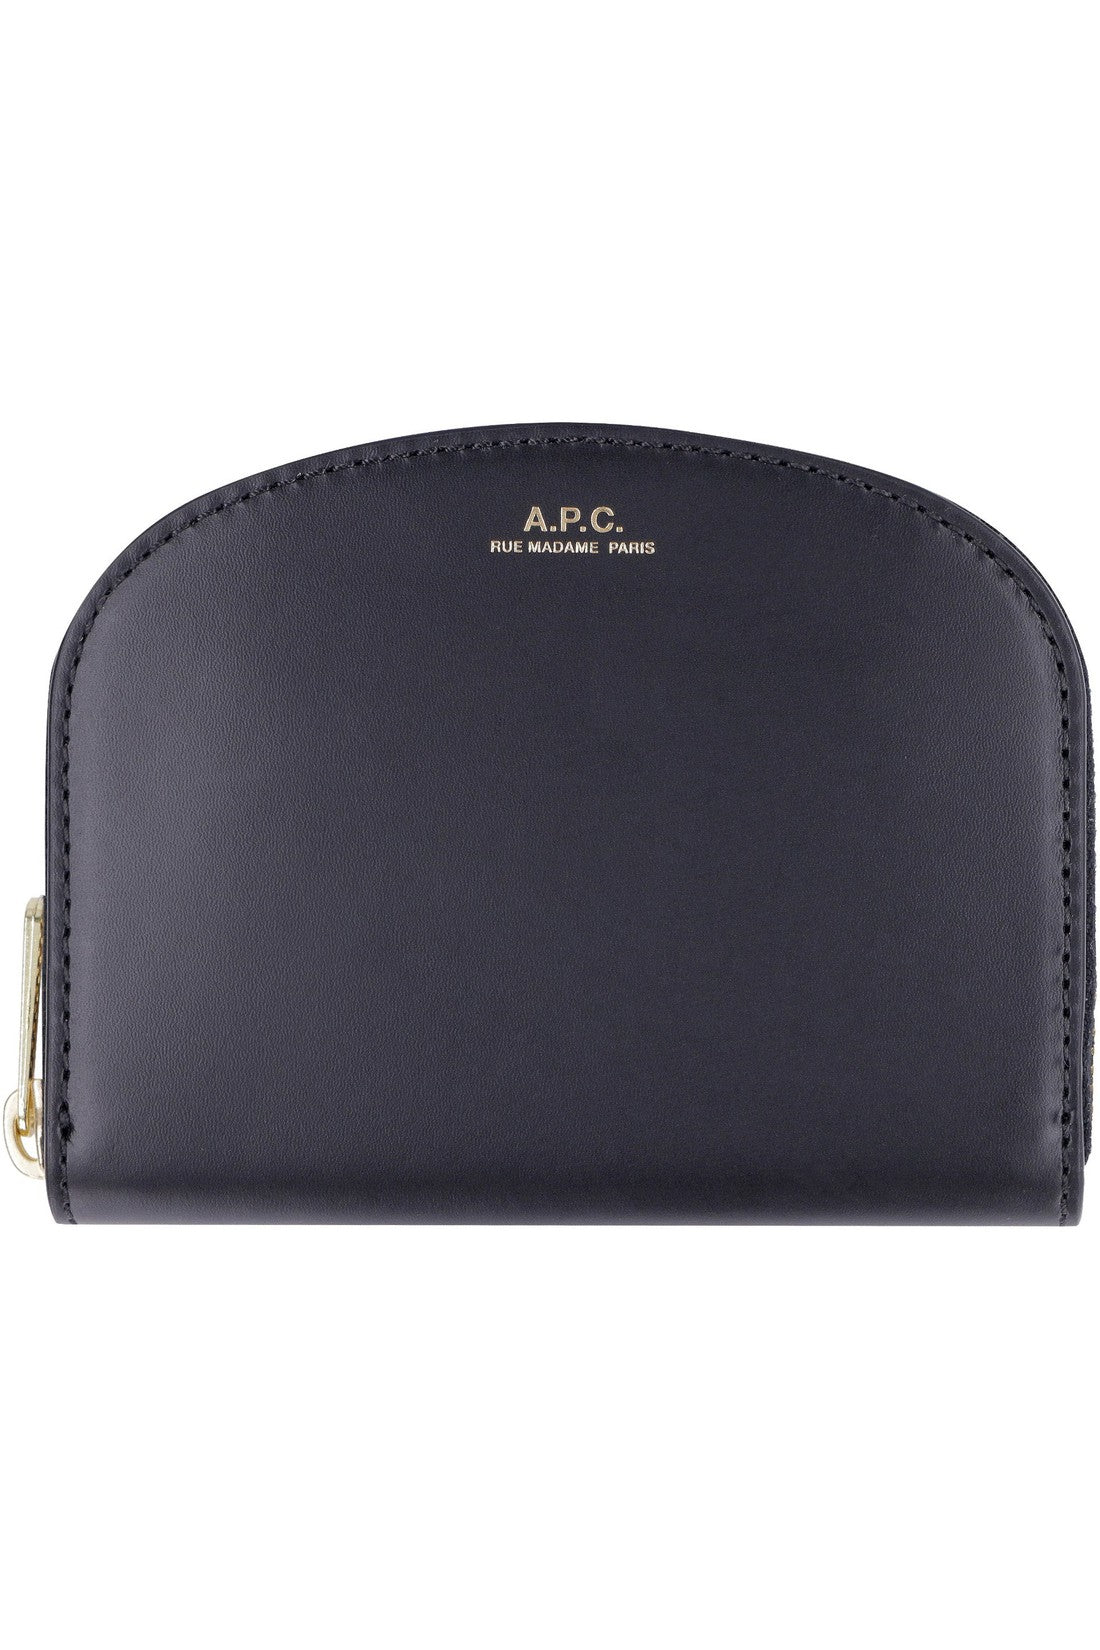 A.P.C.-OUTLET-SALE-Small leather flap-over wallet-ARCHIVIST